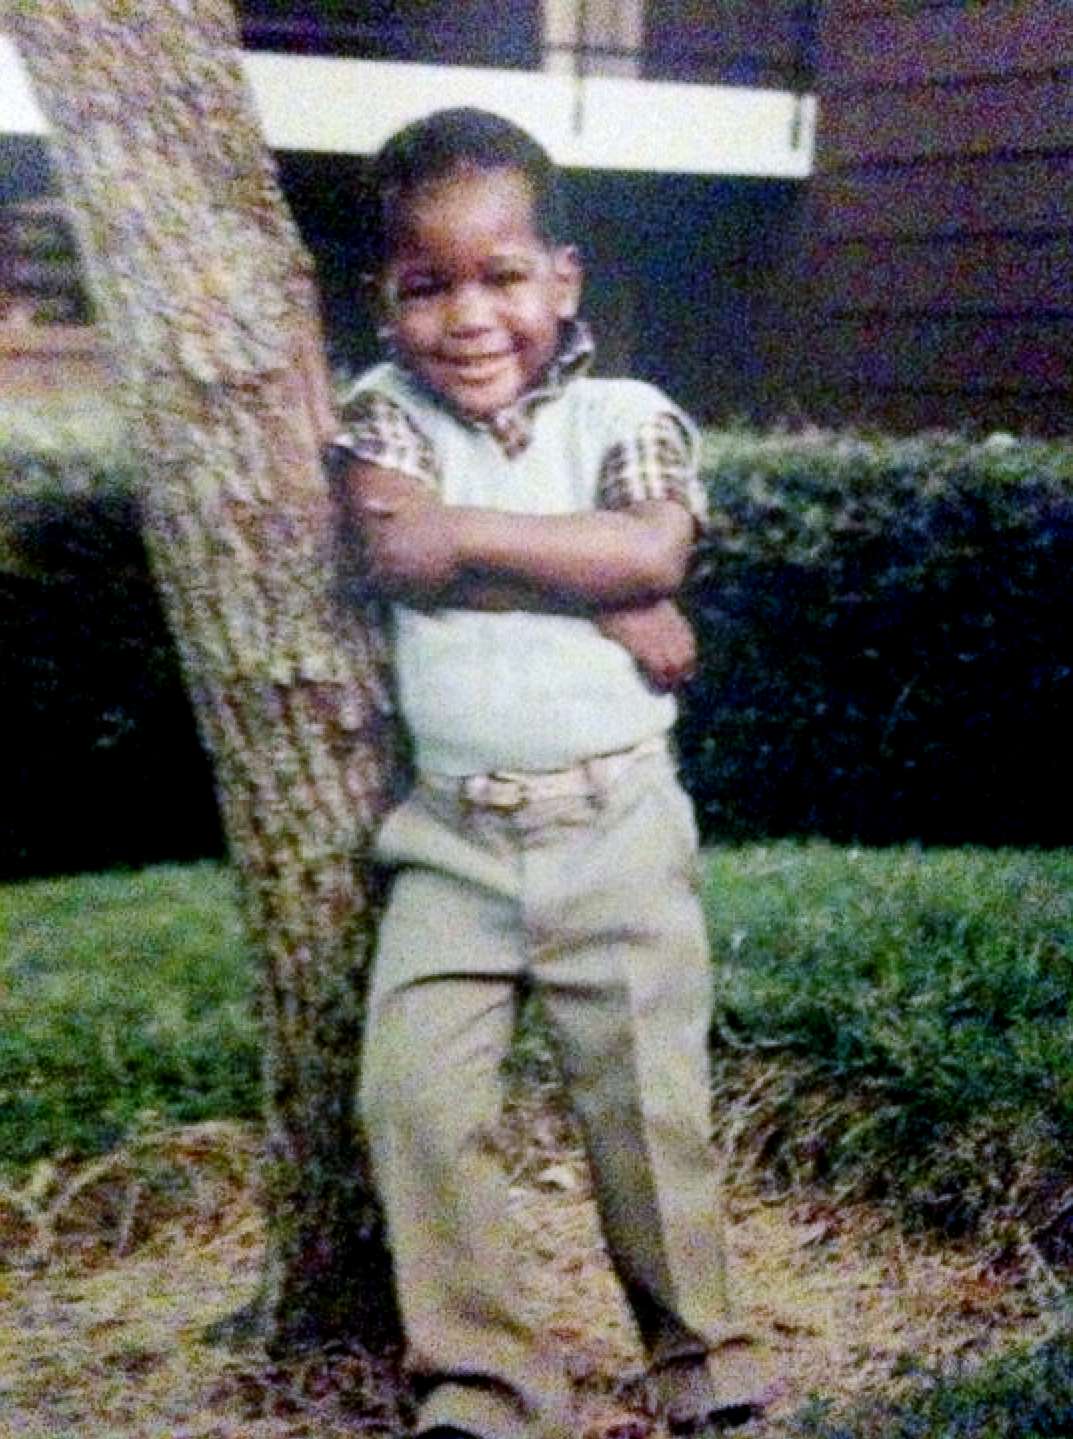 PHOTO: Young Karamo Brown poses in front of his house. "I was a very happy child."